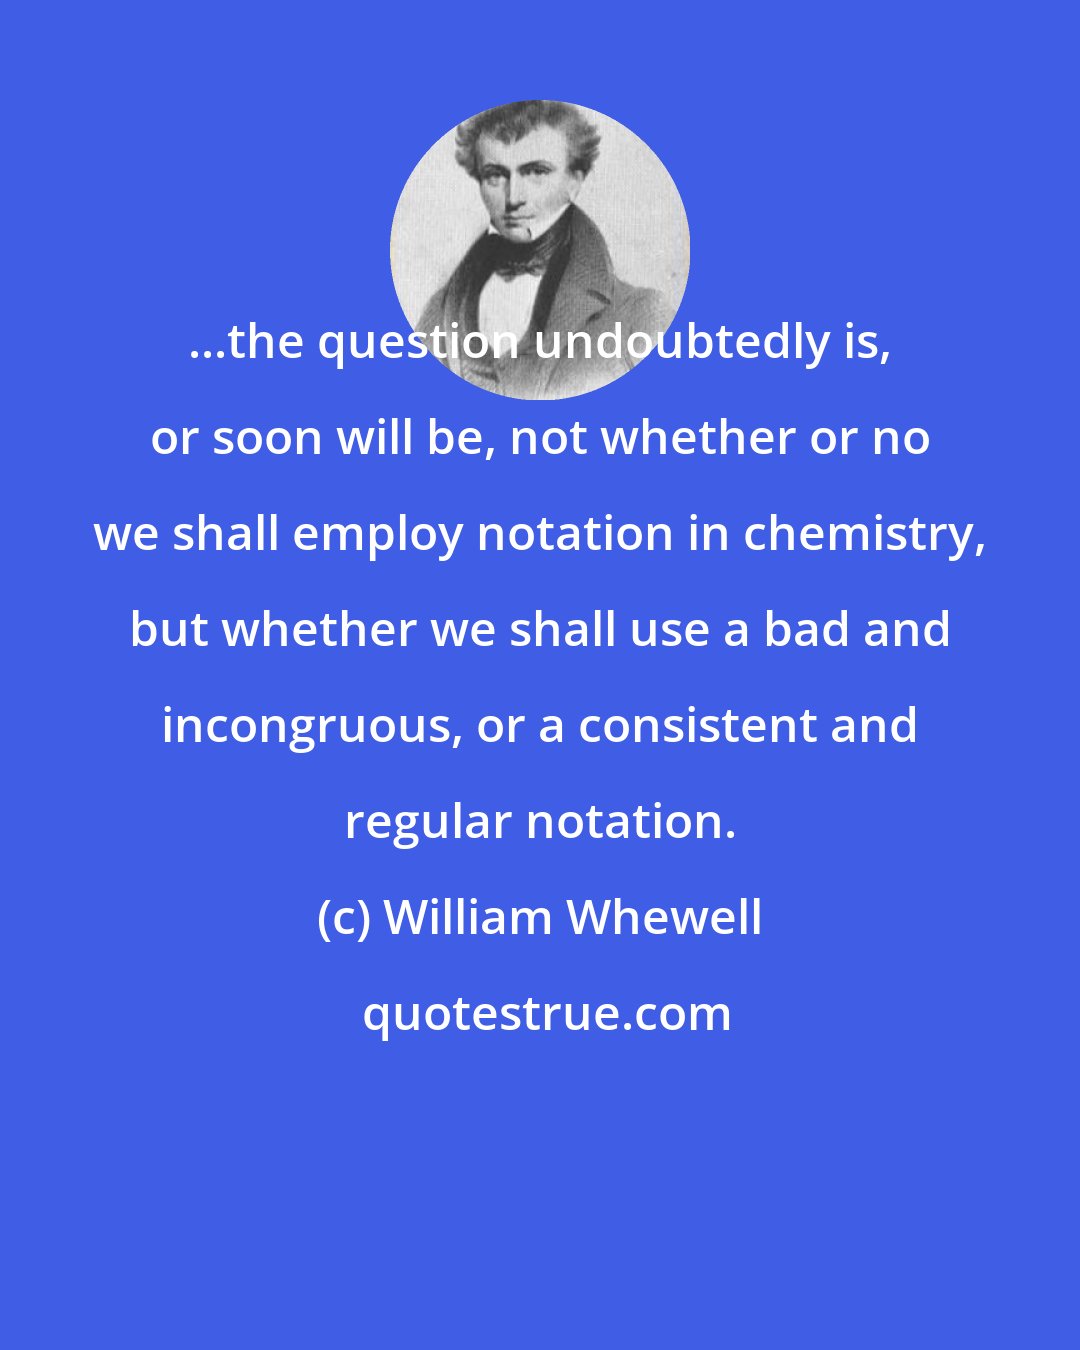 William Whewell: ...the question undoubtedly is, or soon will be, not whether or no we shall employ notation in chemistry, but whether we shall use a bad and incongruous, or a consistent and regular notation.